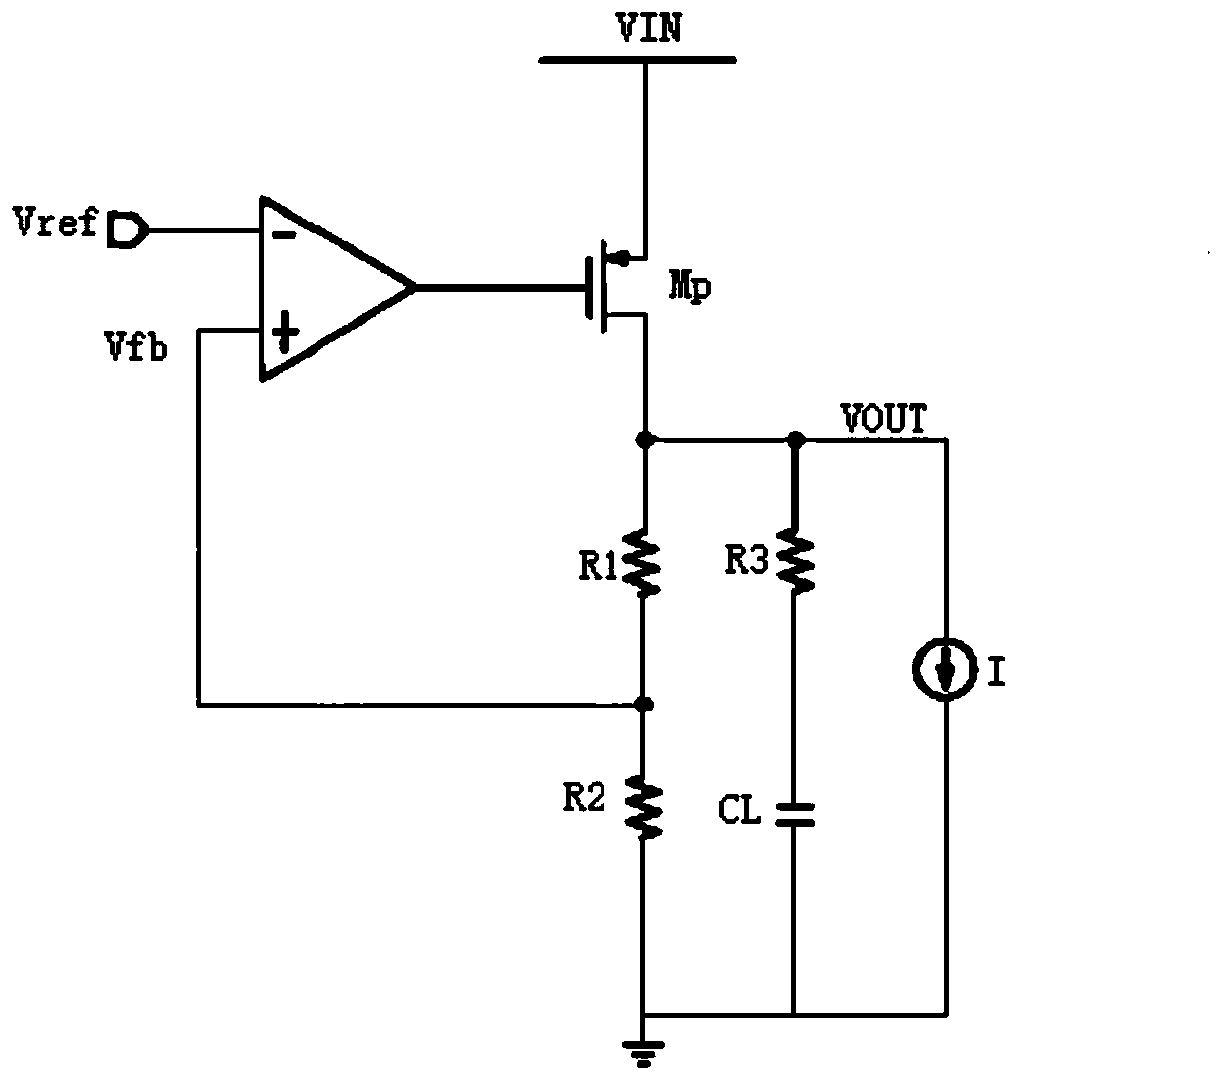 Power supply with wide input voltage